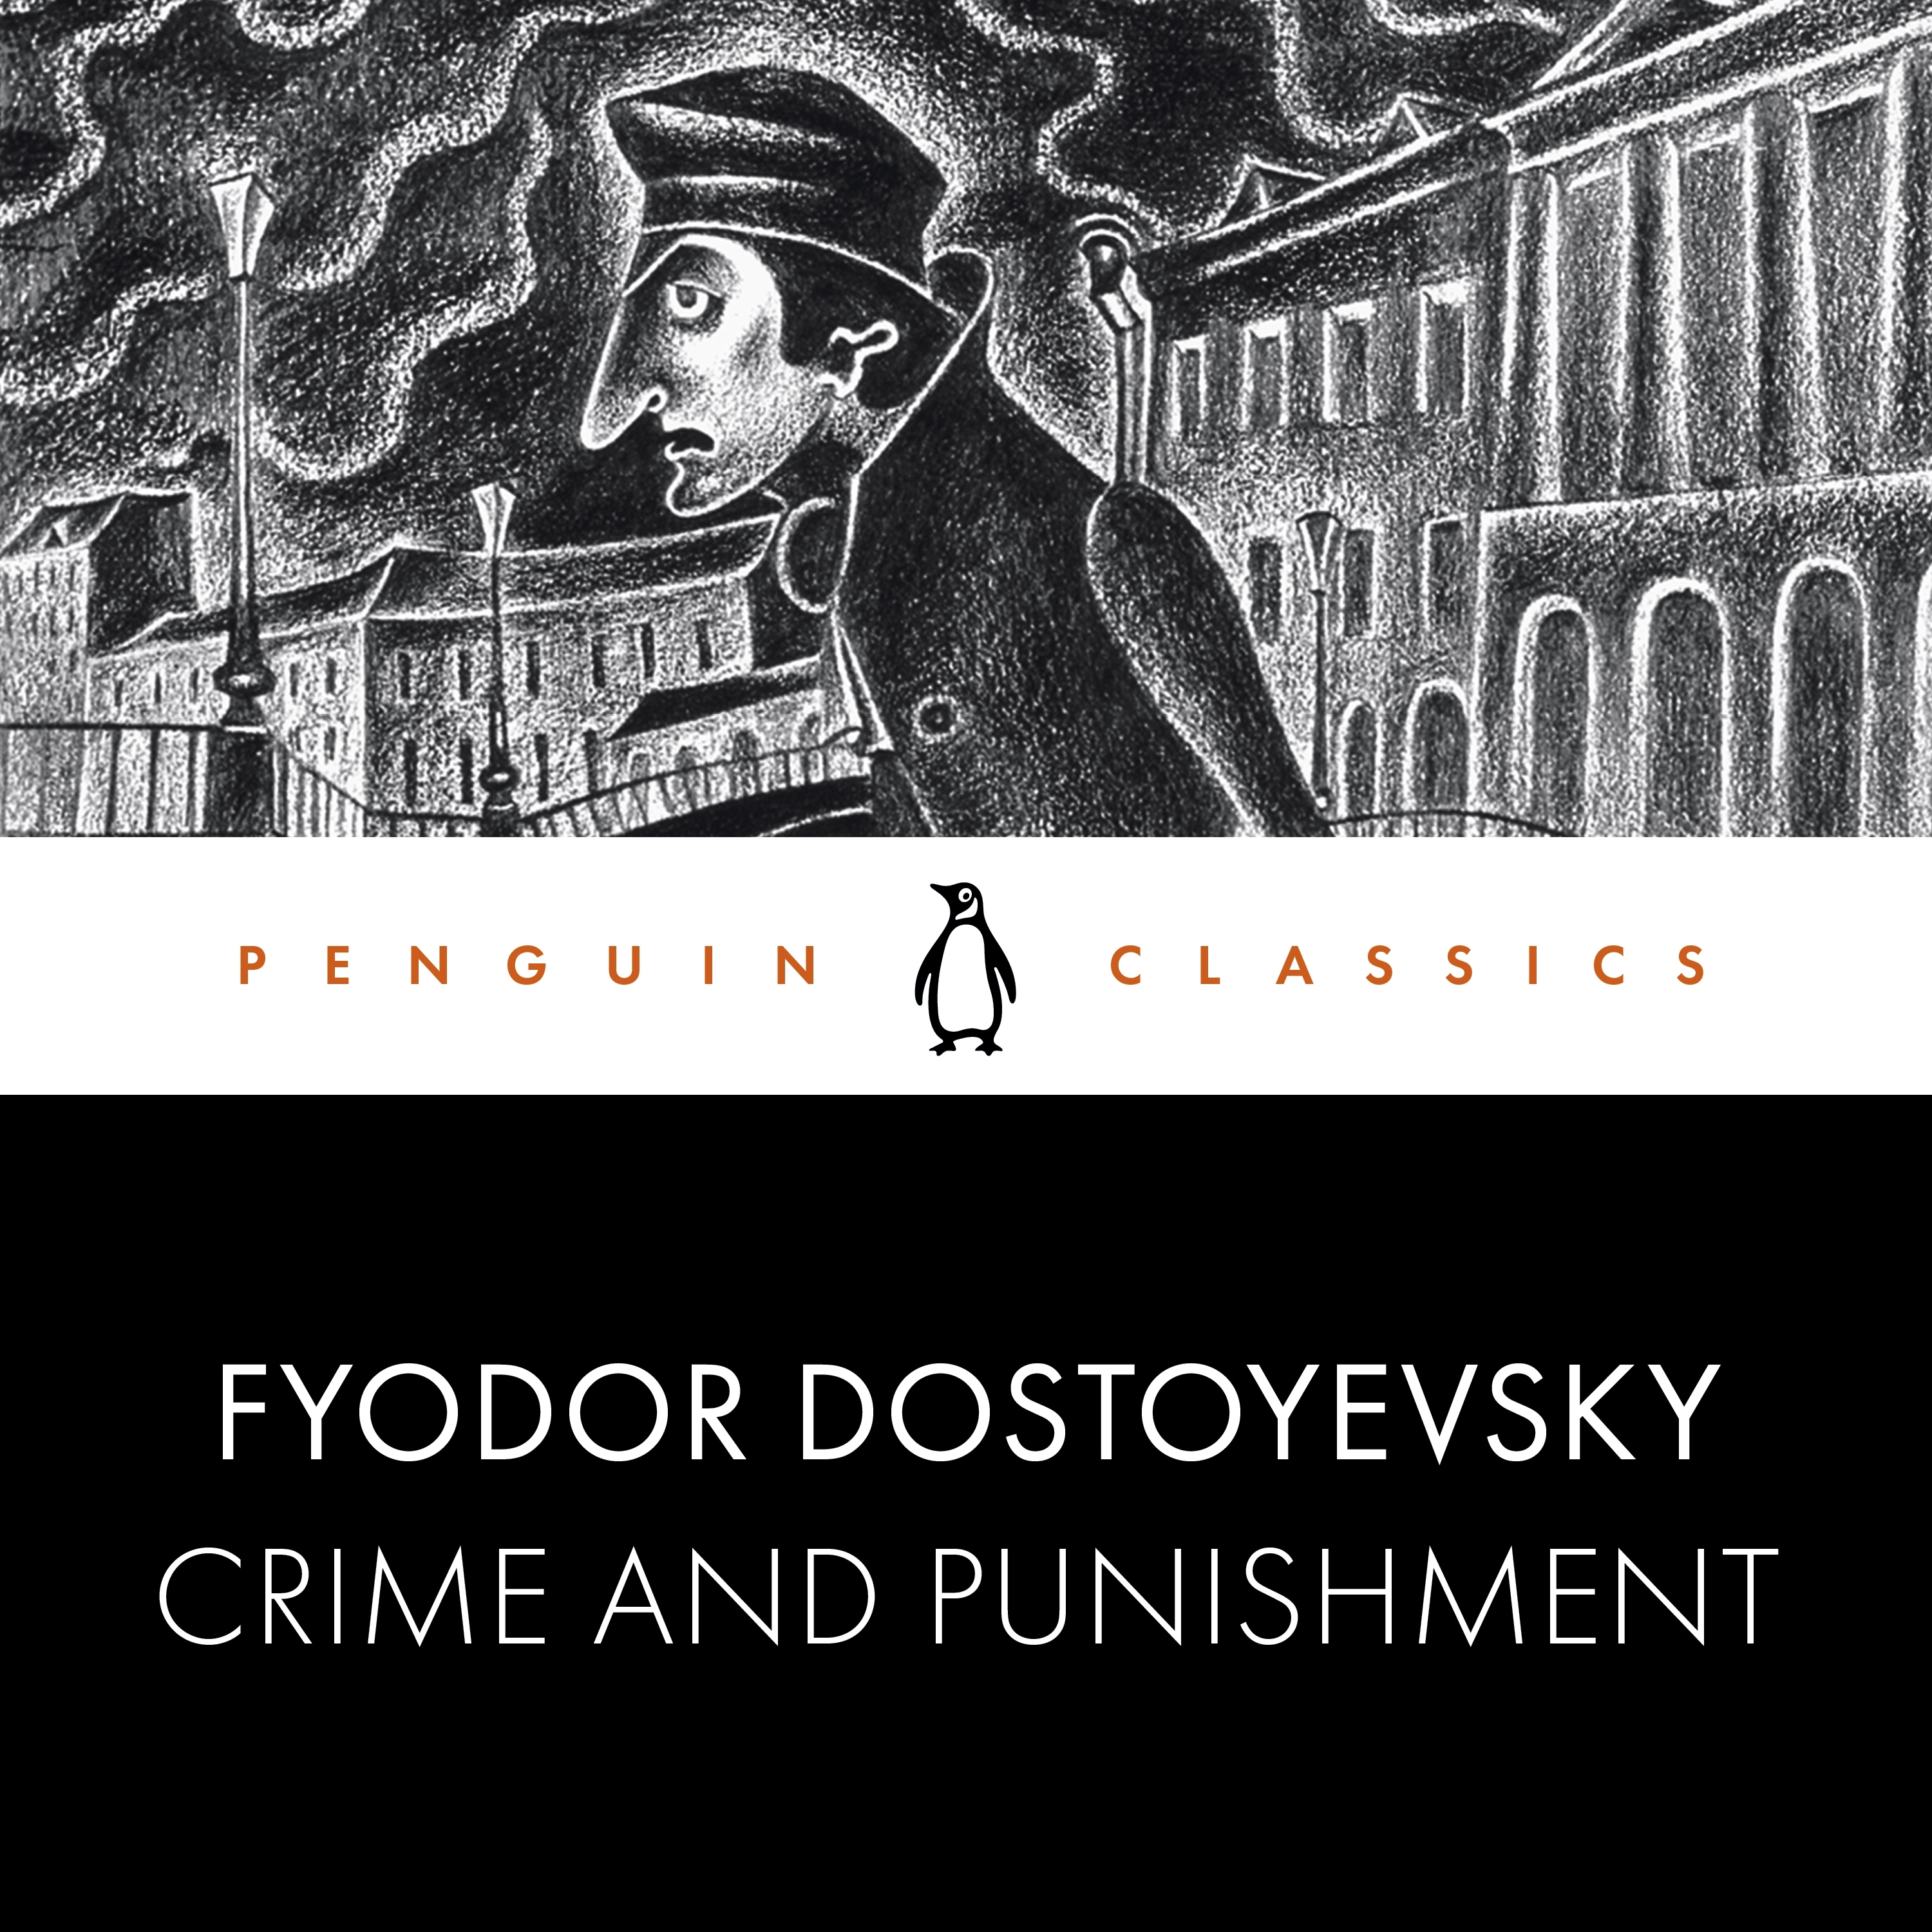 Crime and Punishment by Fyodor Dostoevsky